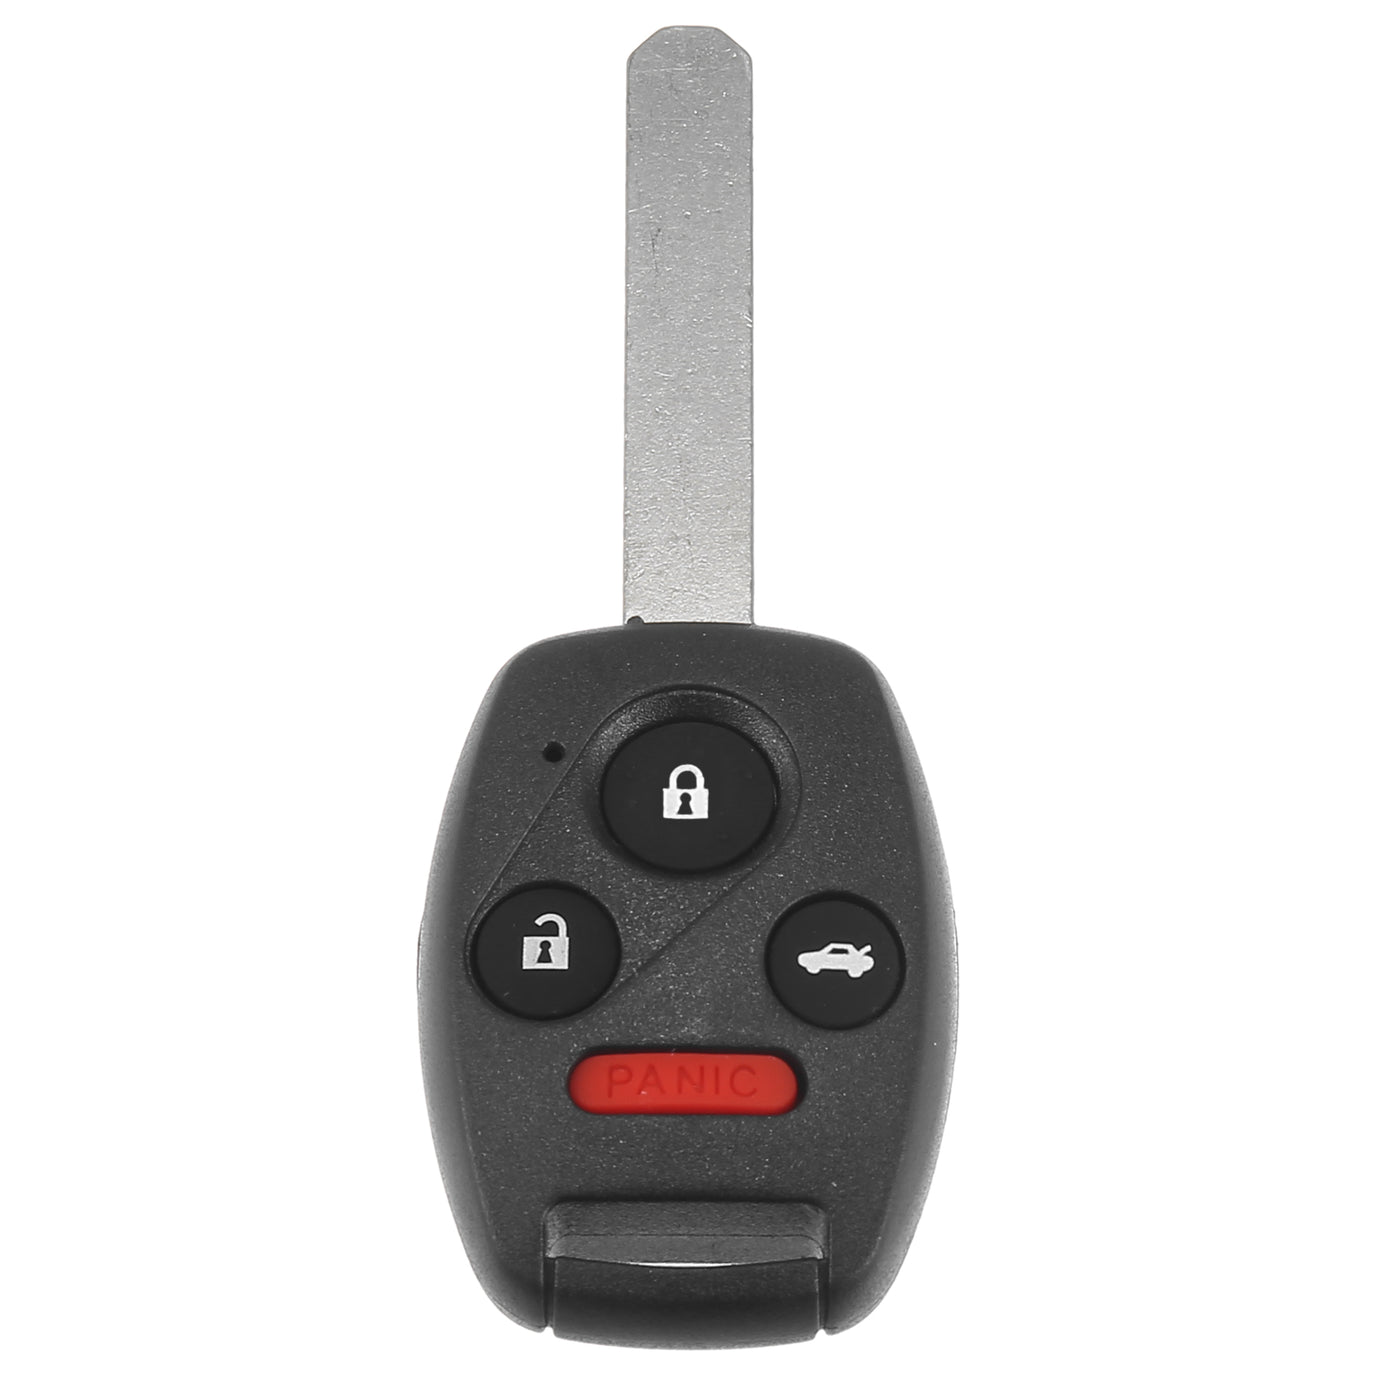 X AUTOHAUX 313.8MHz N5F-S0084A Replacement Smart Proximity Keyless Entry Remote Key Fob for Honda Civic for Acura MDX 2006-2013 4 Buttons Uncut Car Ignition Key 46 Chip